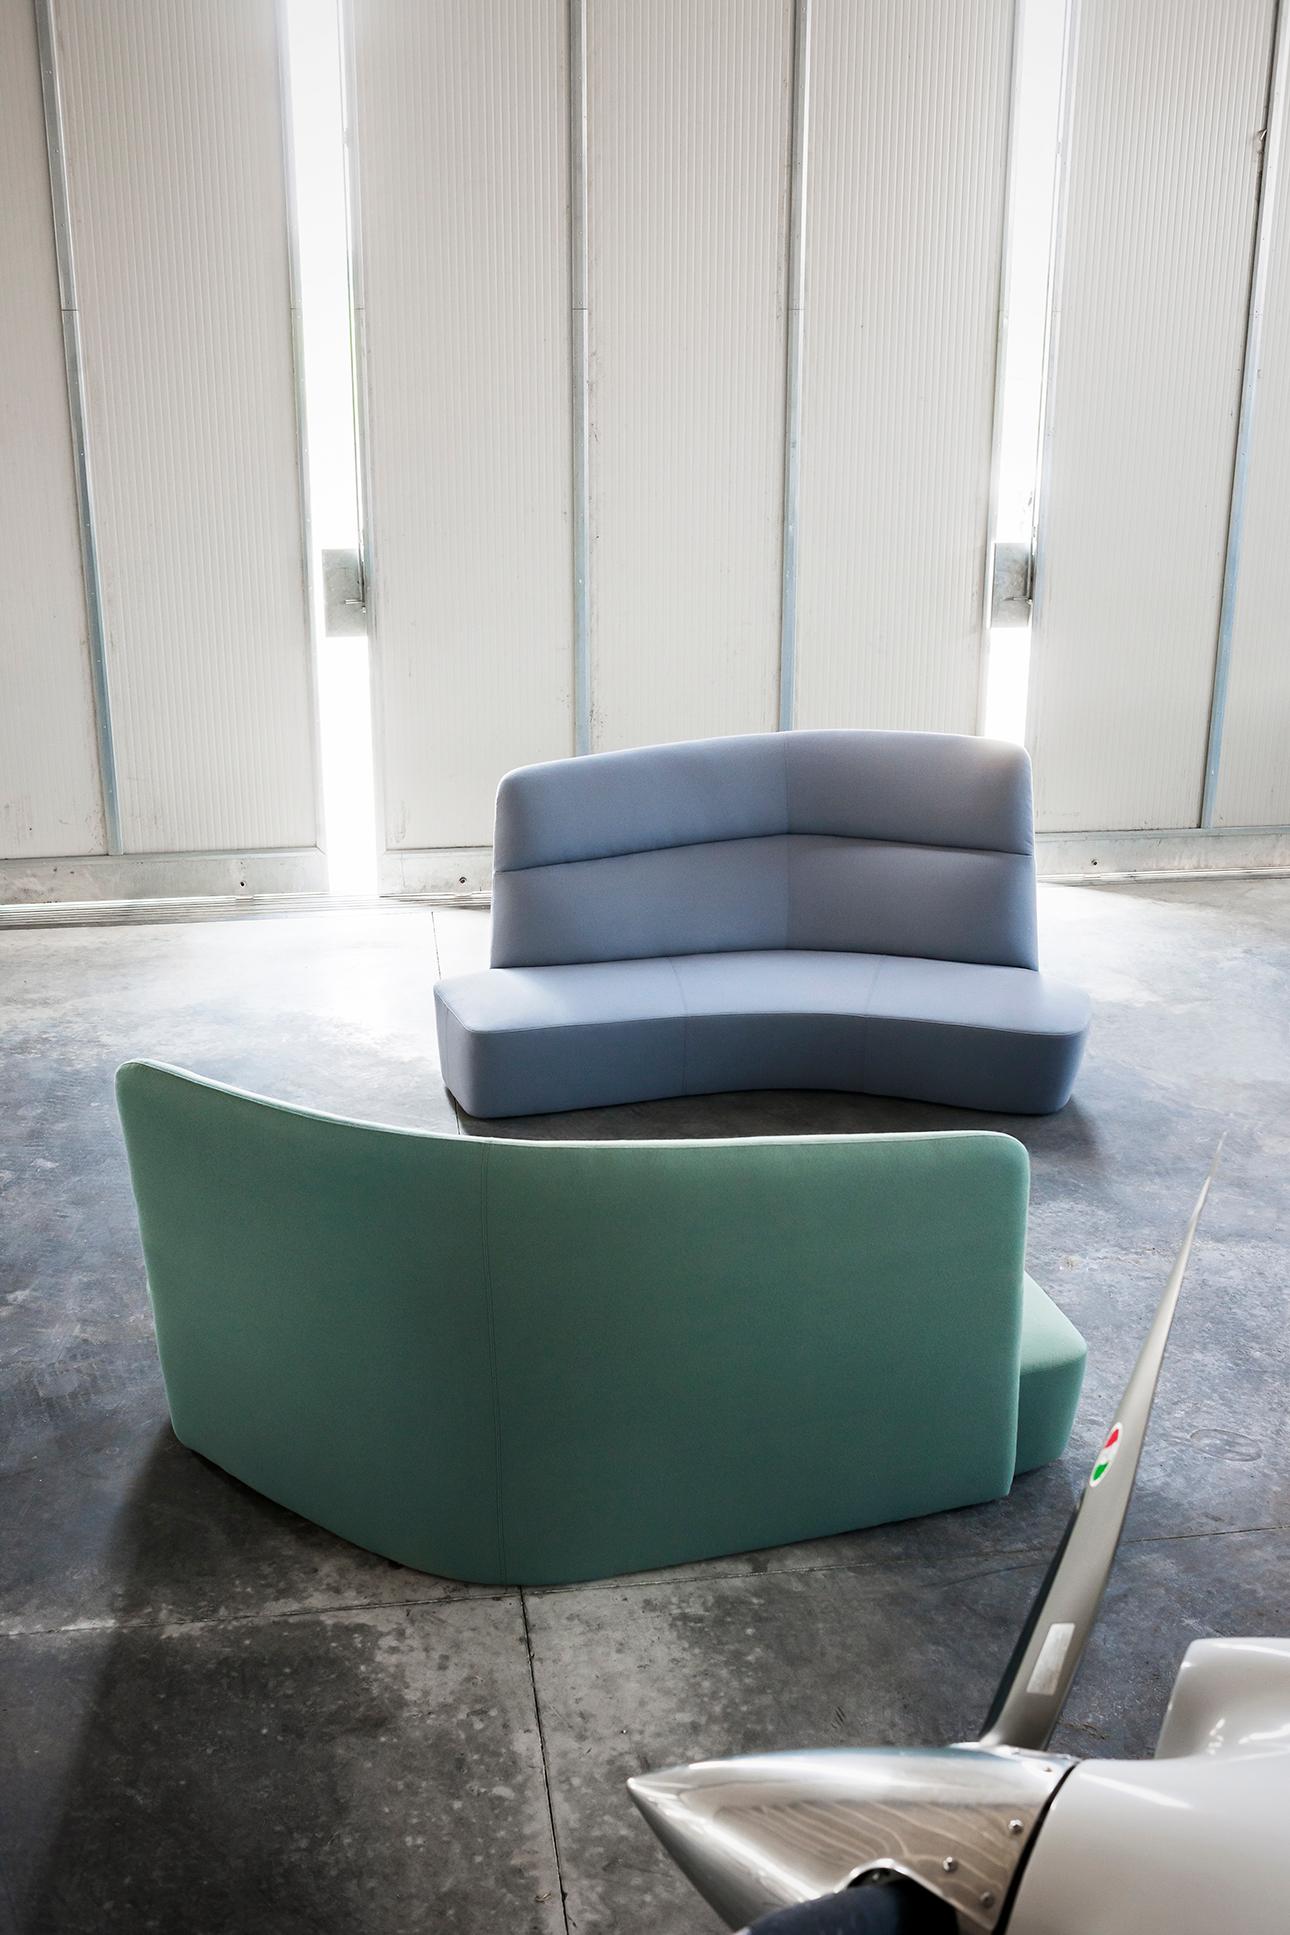 Tacchini Polar Alcove sofa in silene fabric by Pearson Lloyd. Polar Alcove is a seating system inspired by the blocks of ice that float in the waters of the North Sea, a place far from the frenzy of urban life where silence and pristine nature